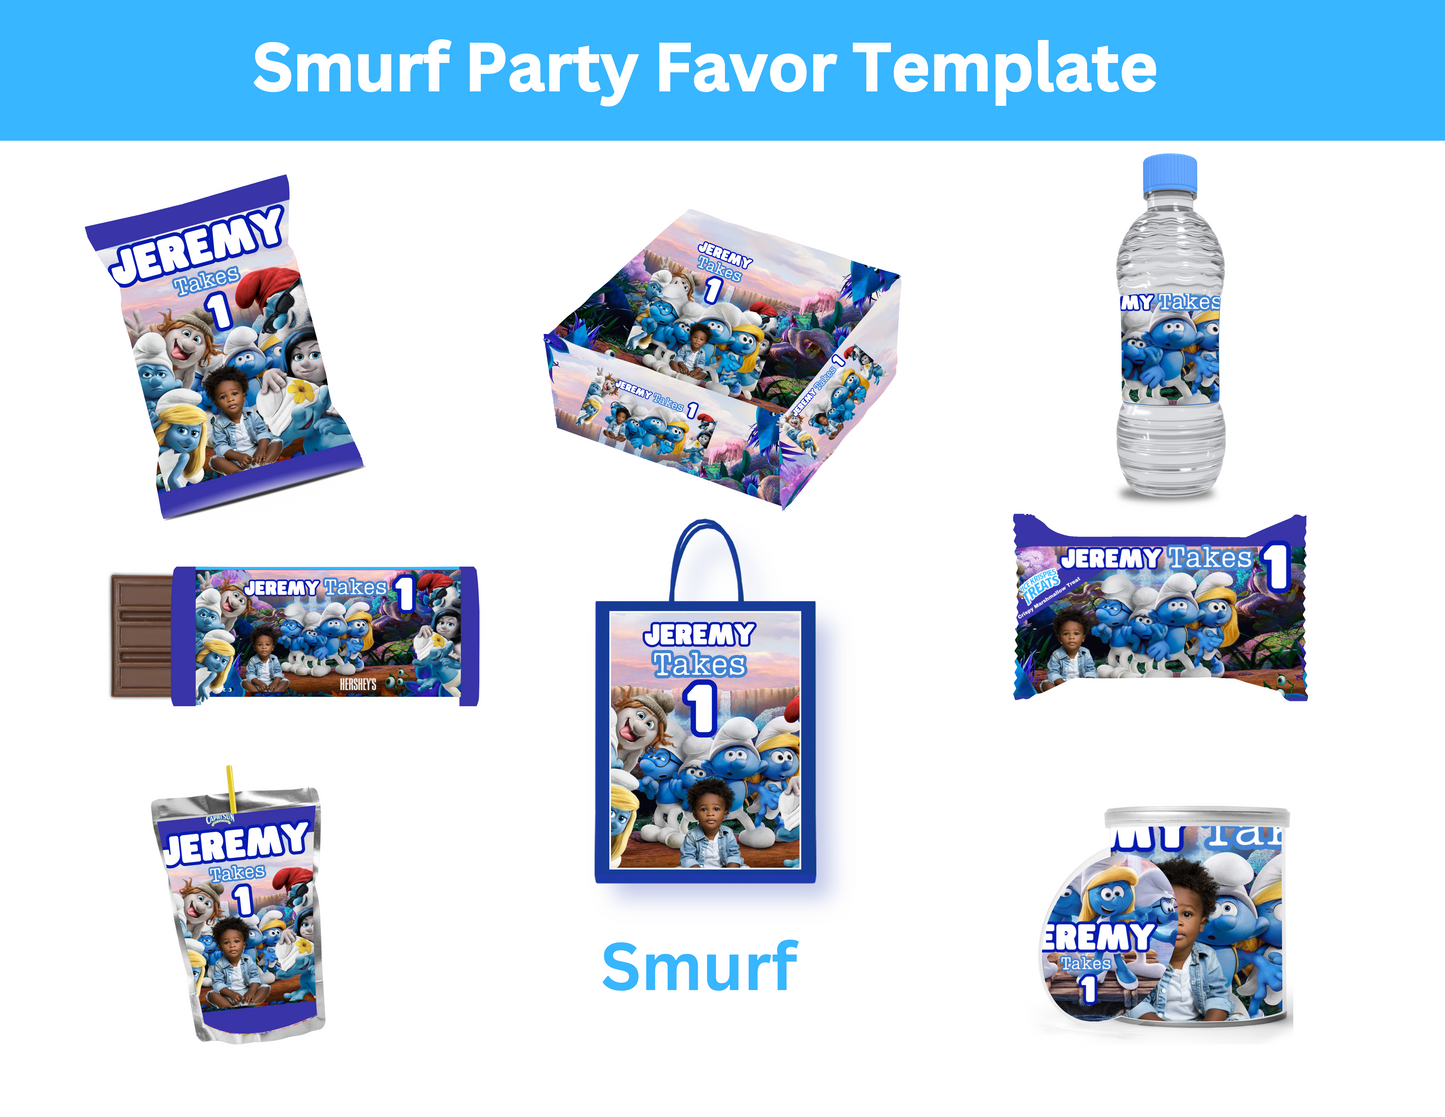 Smurf Party Favor Templates